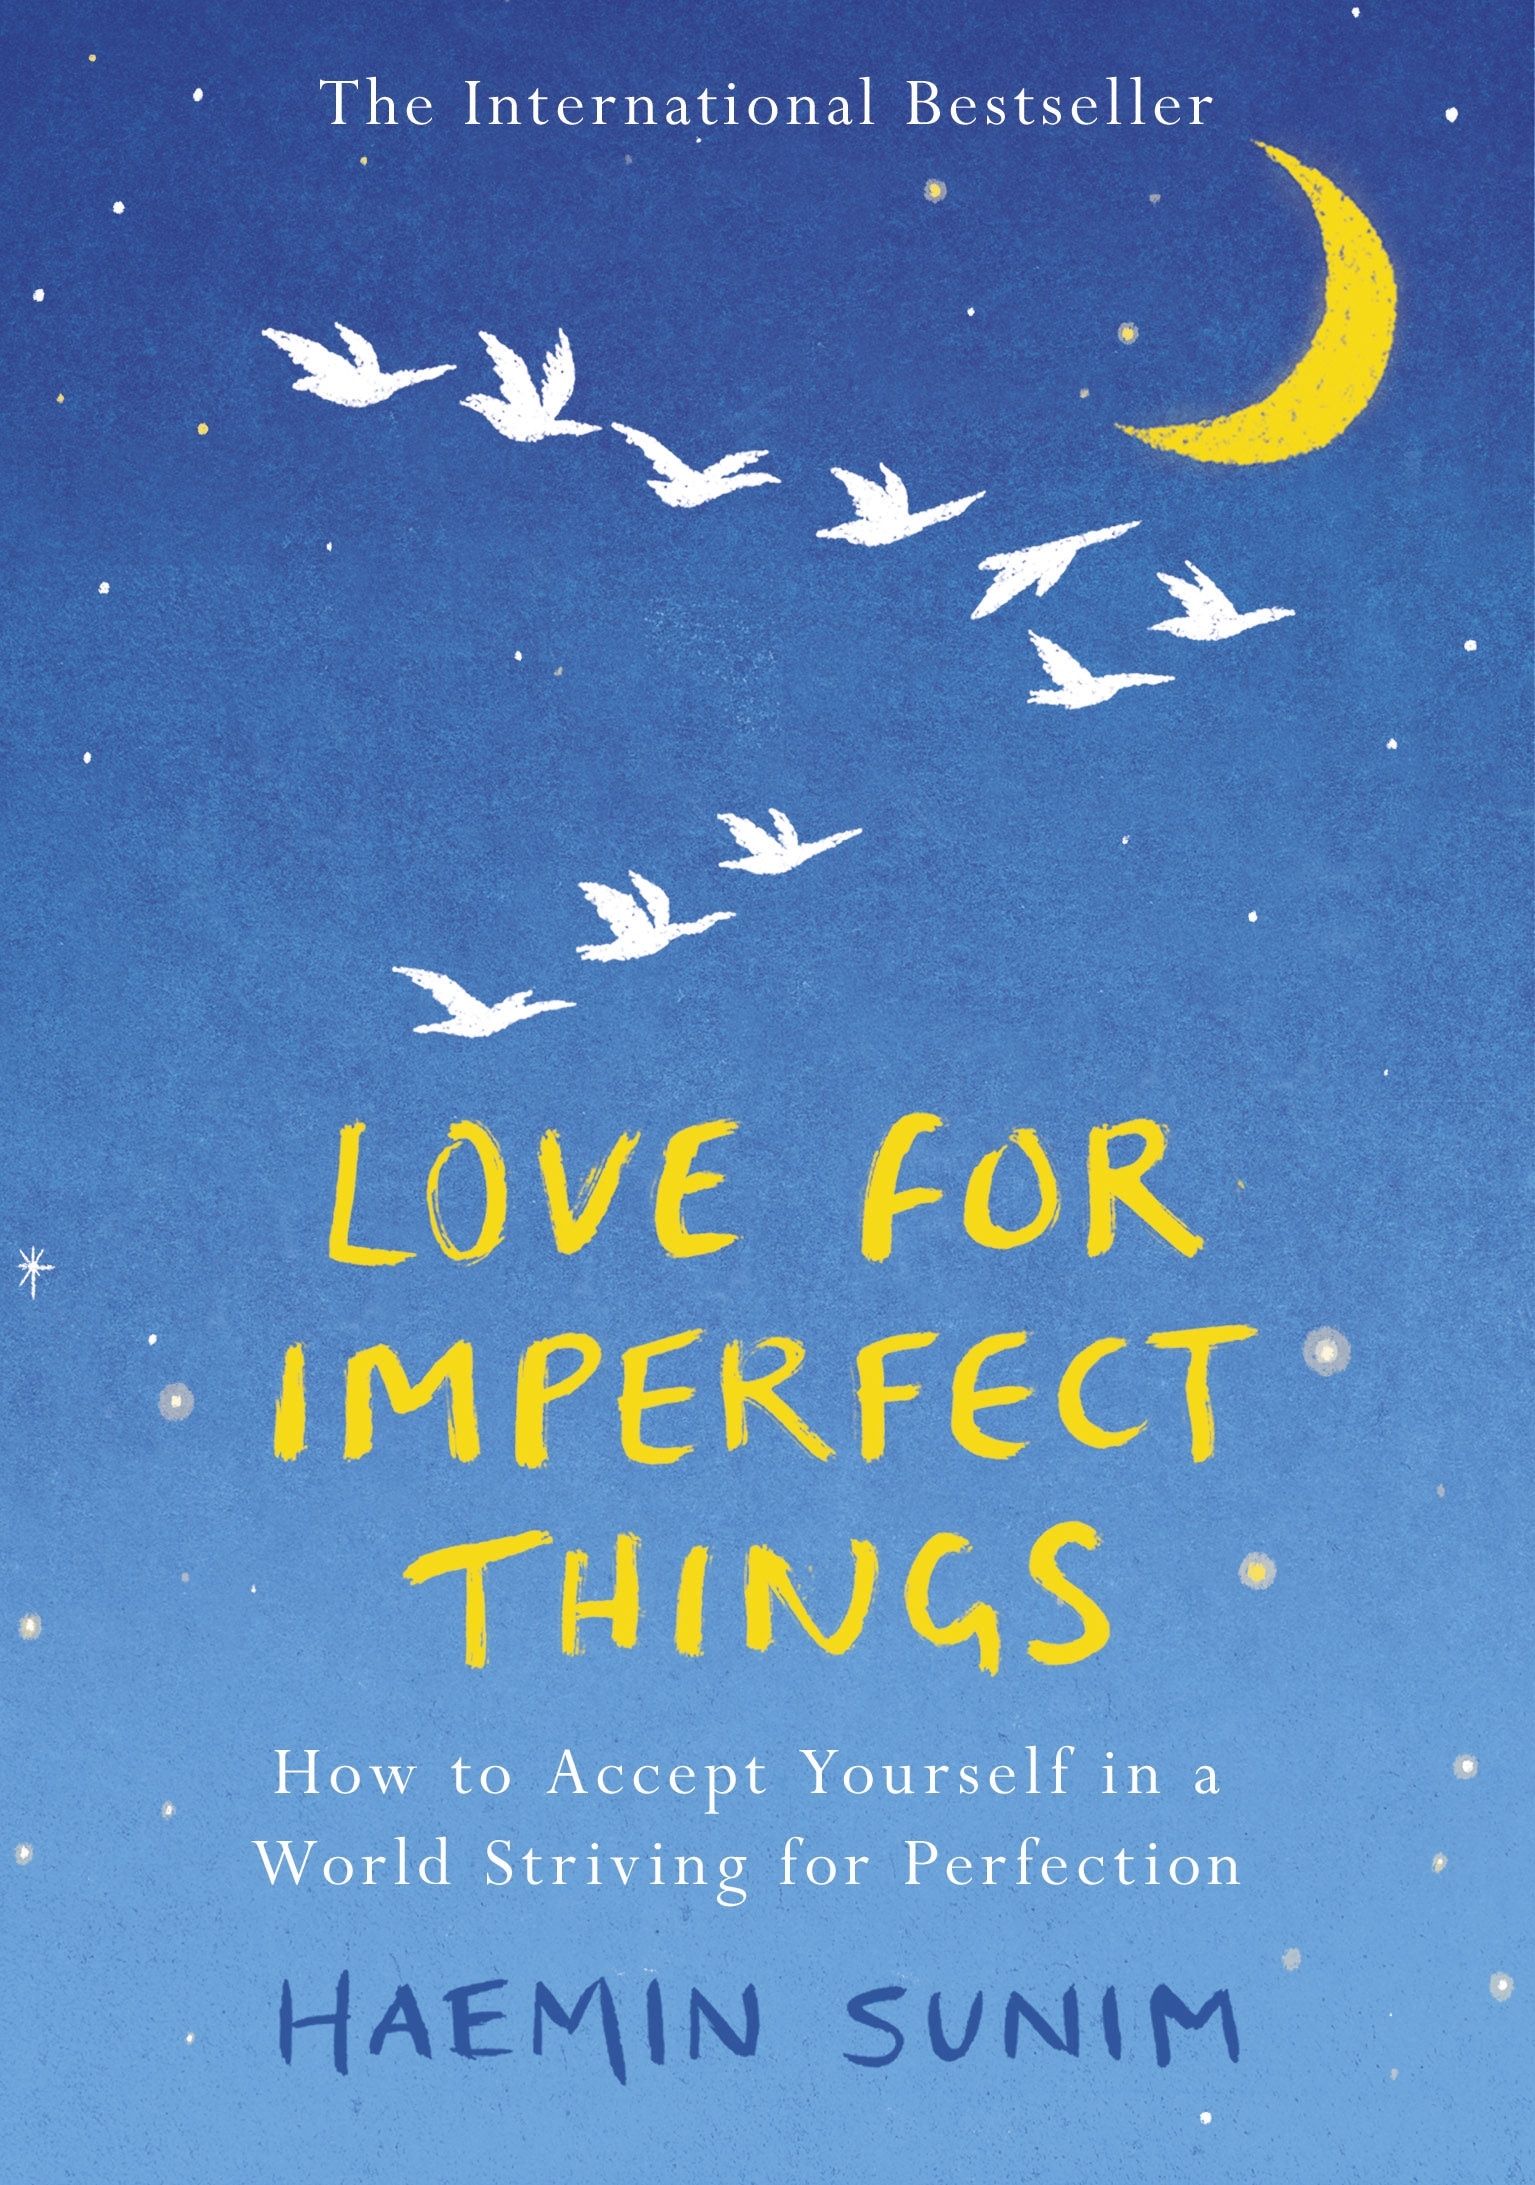 Book “Love for Imperfect Things” by Haemin Sunim — January 24, 2019